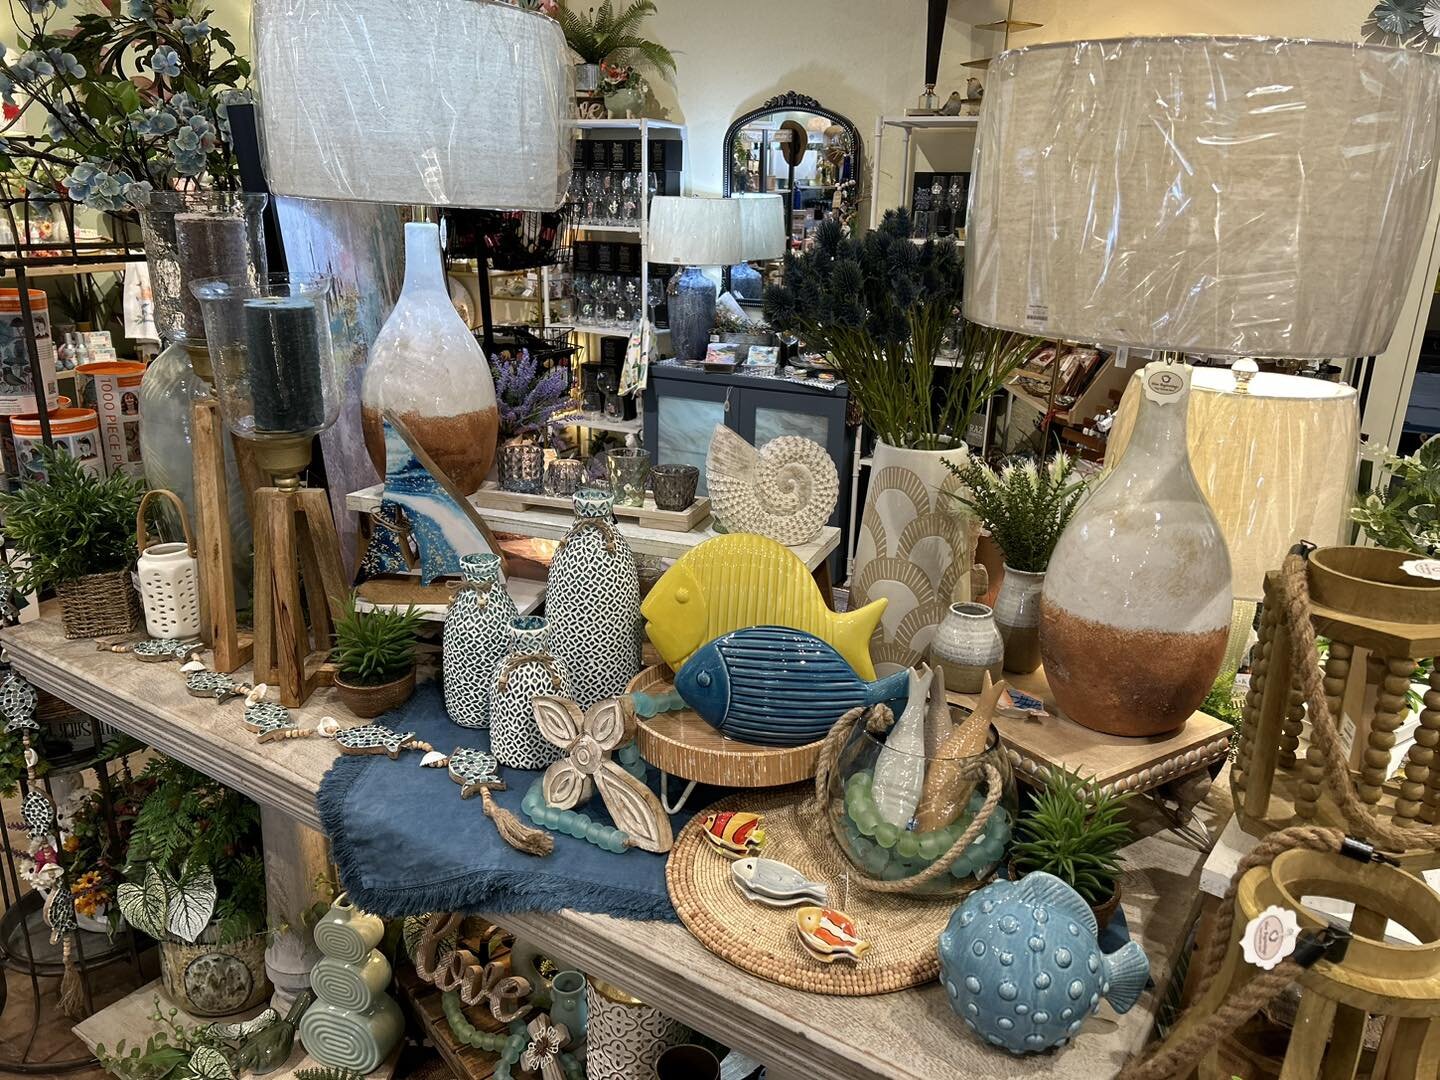 Coastal living&hellip;
Come see us soon limited quantities. 
Open Every Day, @ 410 S. Austin Street in the Rockport Cultural Arts District - RCAD

#coastalliving #shoplocal #rockportculture #hellorockport #visitrockportfulton #yourfavoritestorerockpo